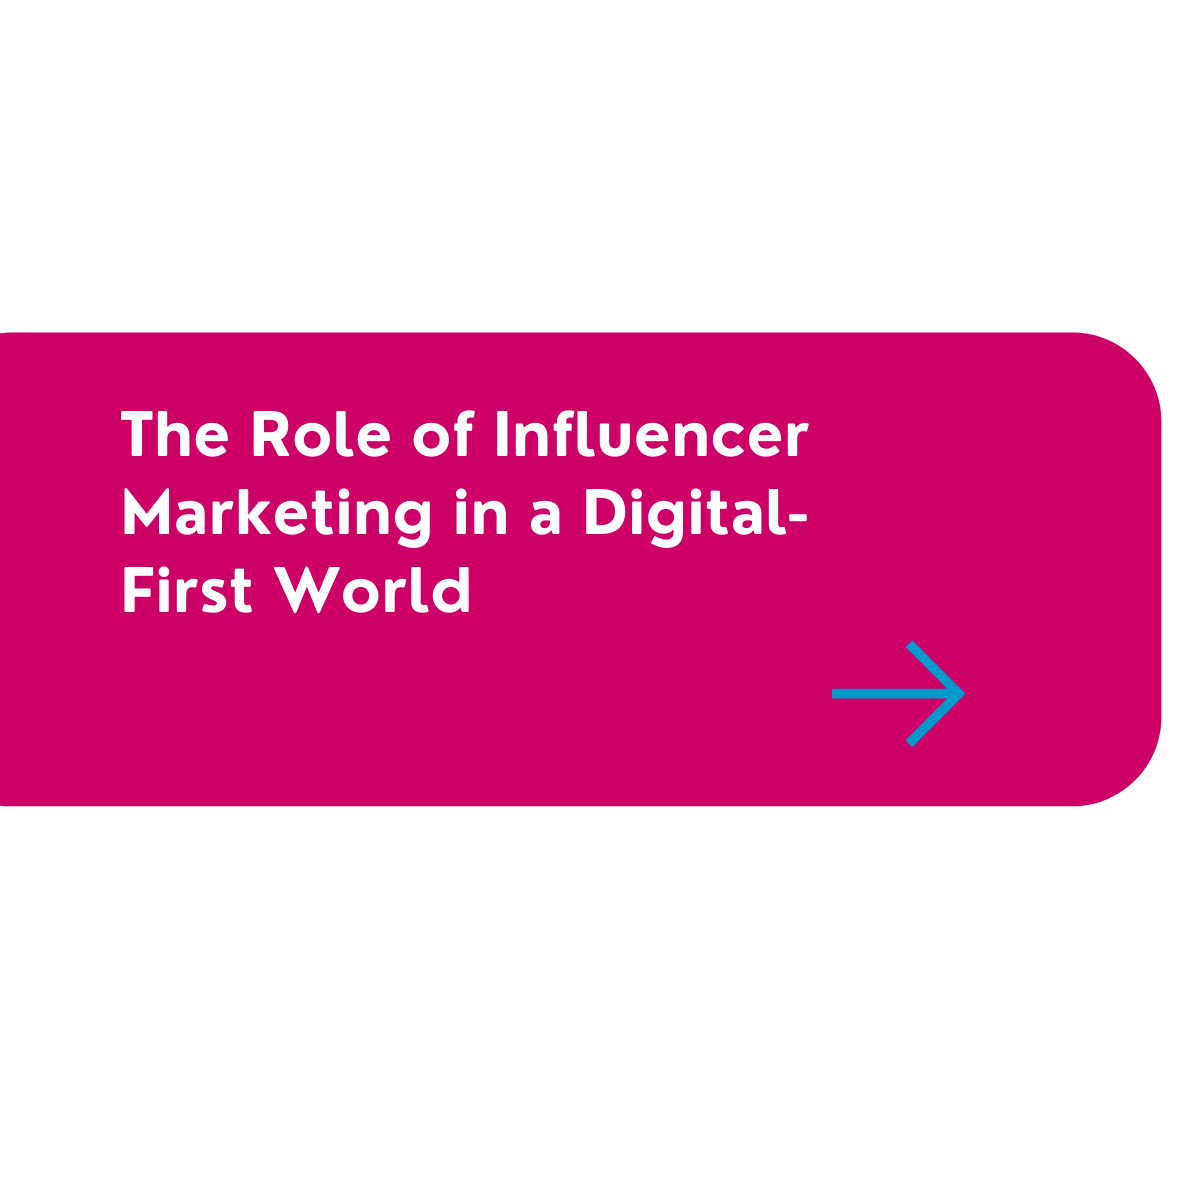 The Role of Influencer Marketing in a Digital-First World